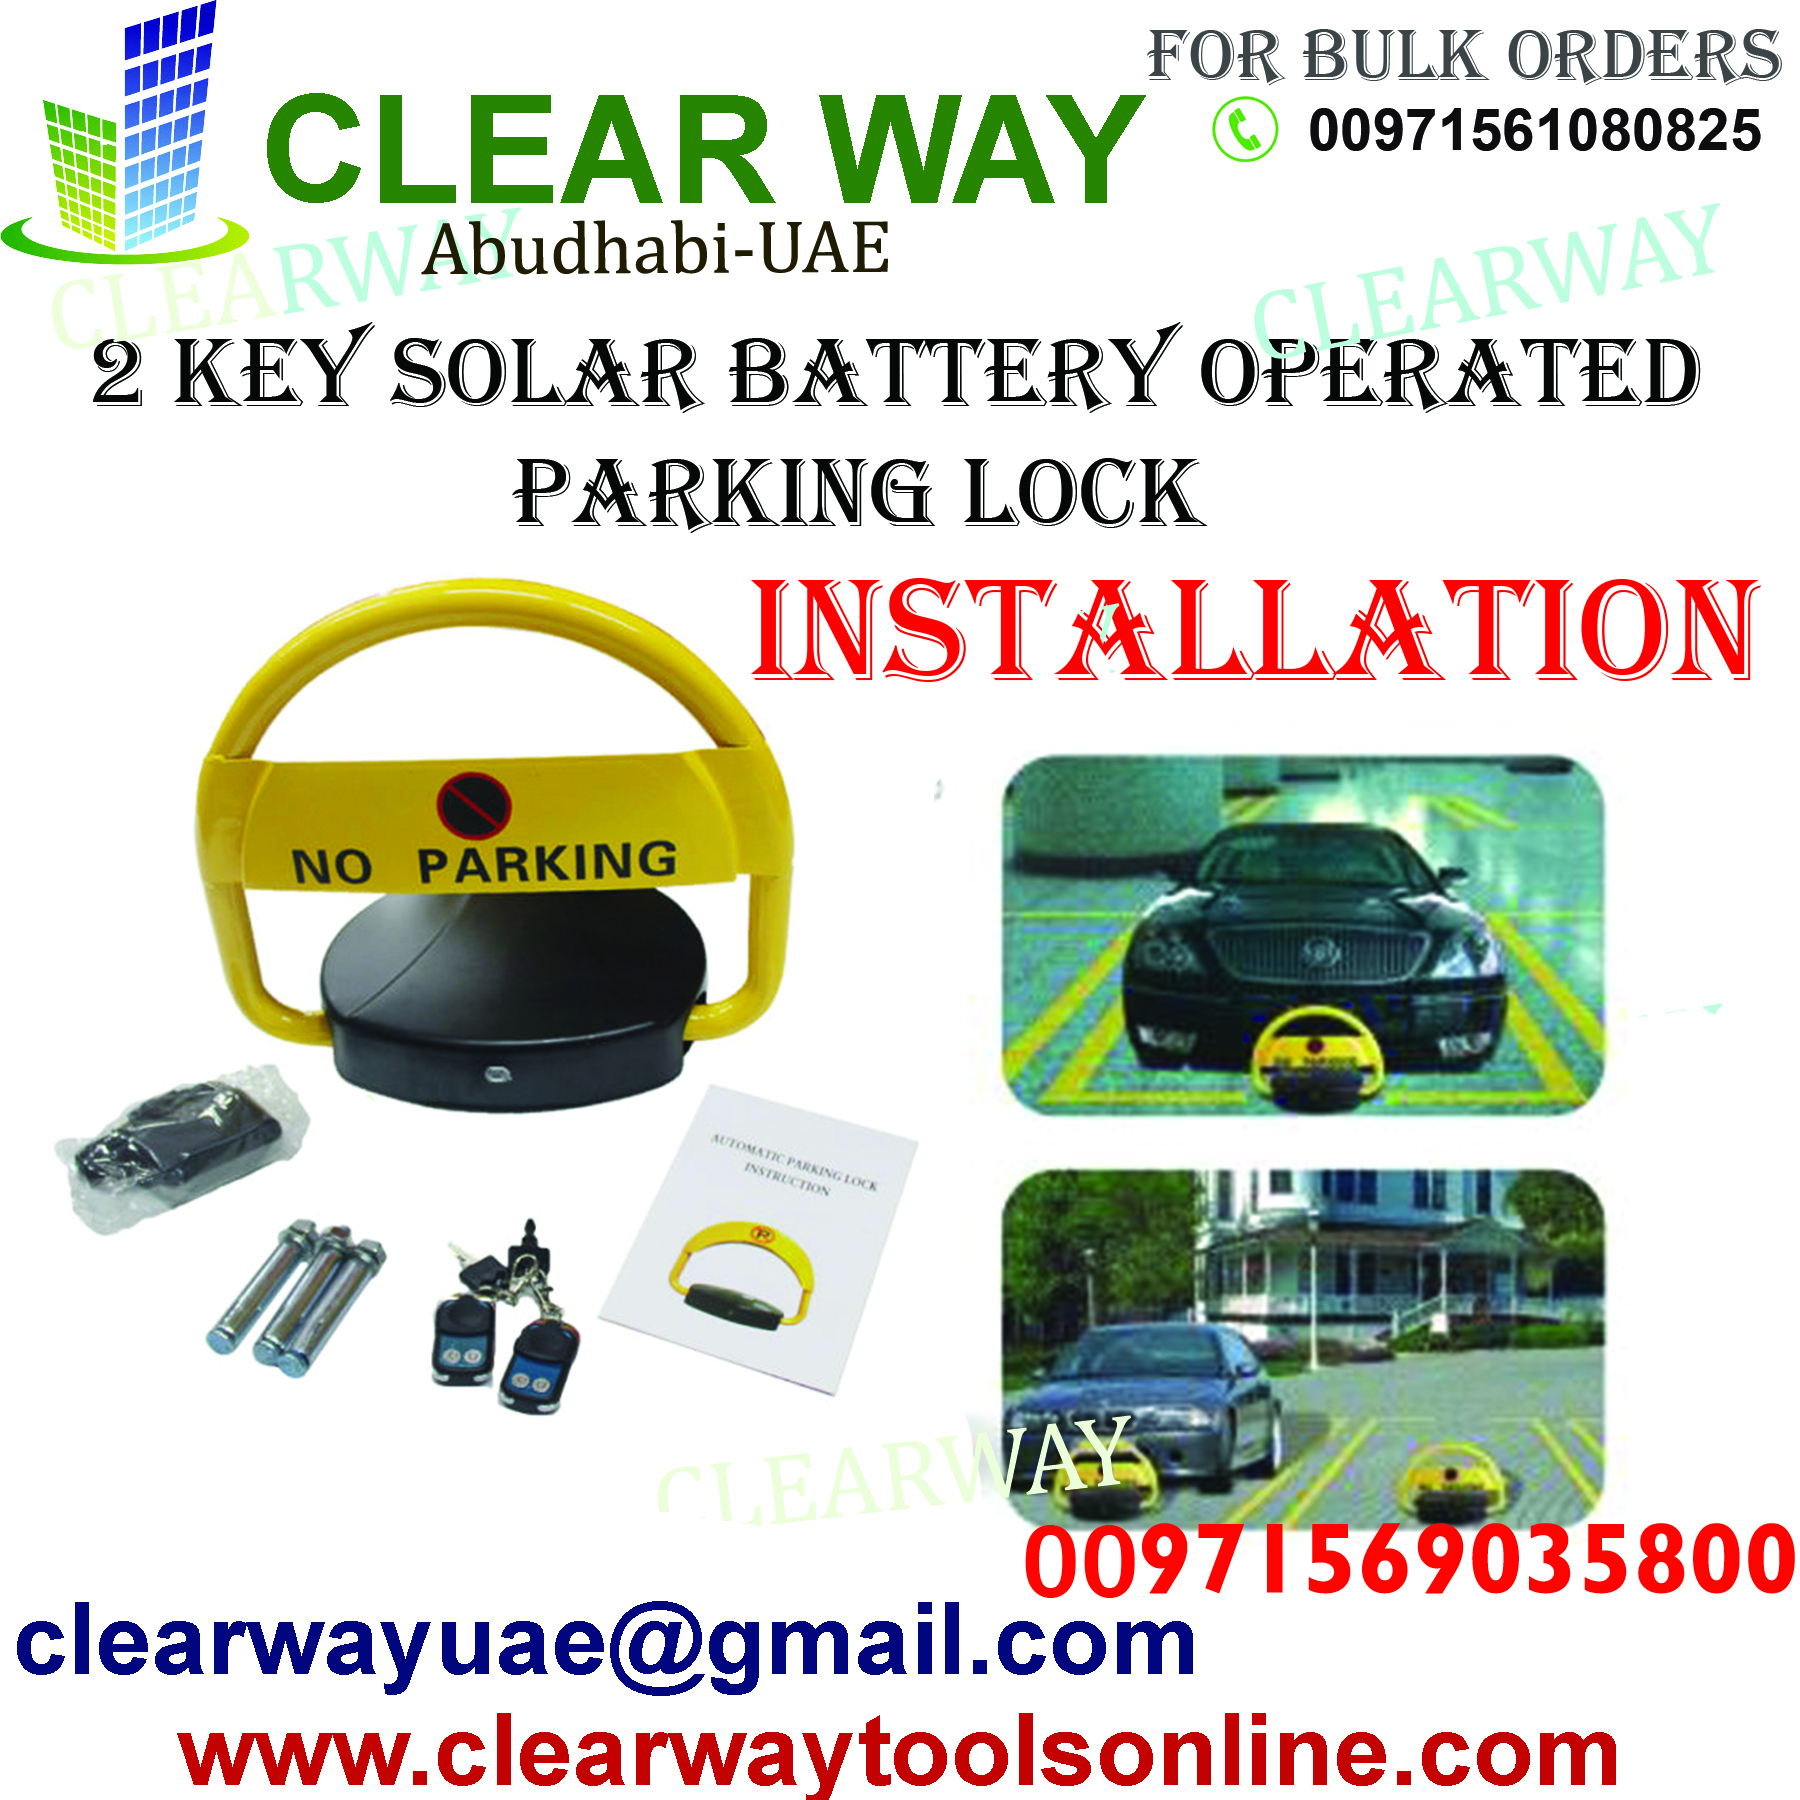 2 KEY SOLAR BATTERY OPERATED PARKING LOCK INSTALLATION IN MUSSAFAH , ABUDHABI , UAE BY CLEARWAY